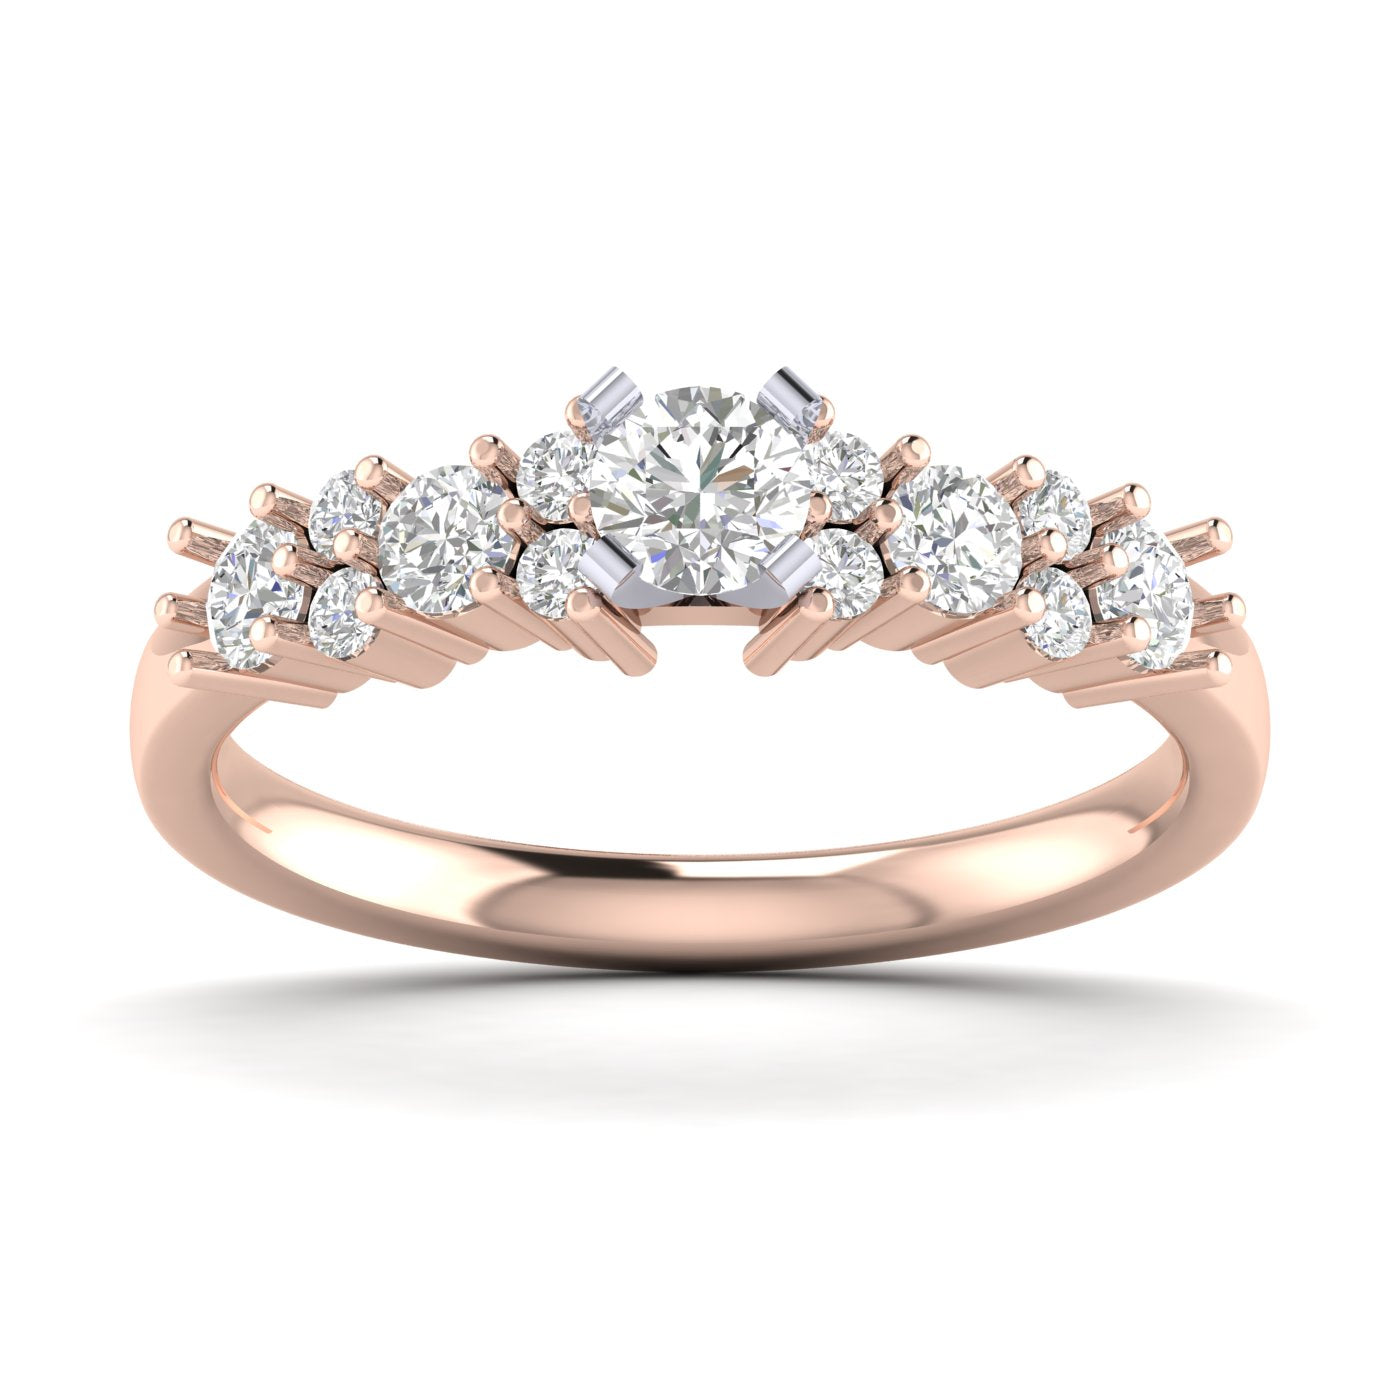 Flawless Solitaire Diamond Ring